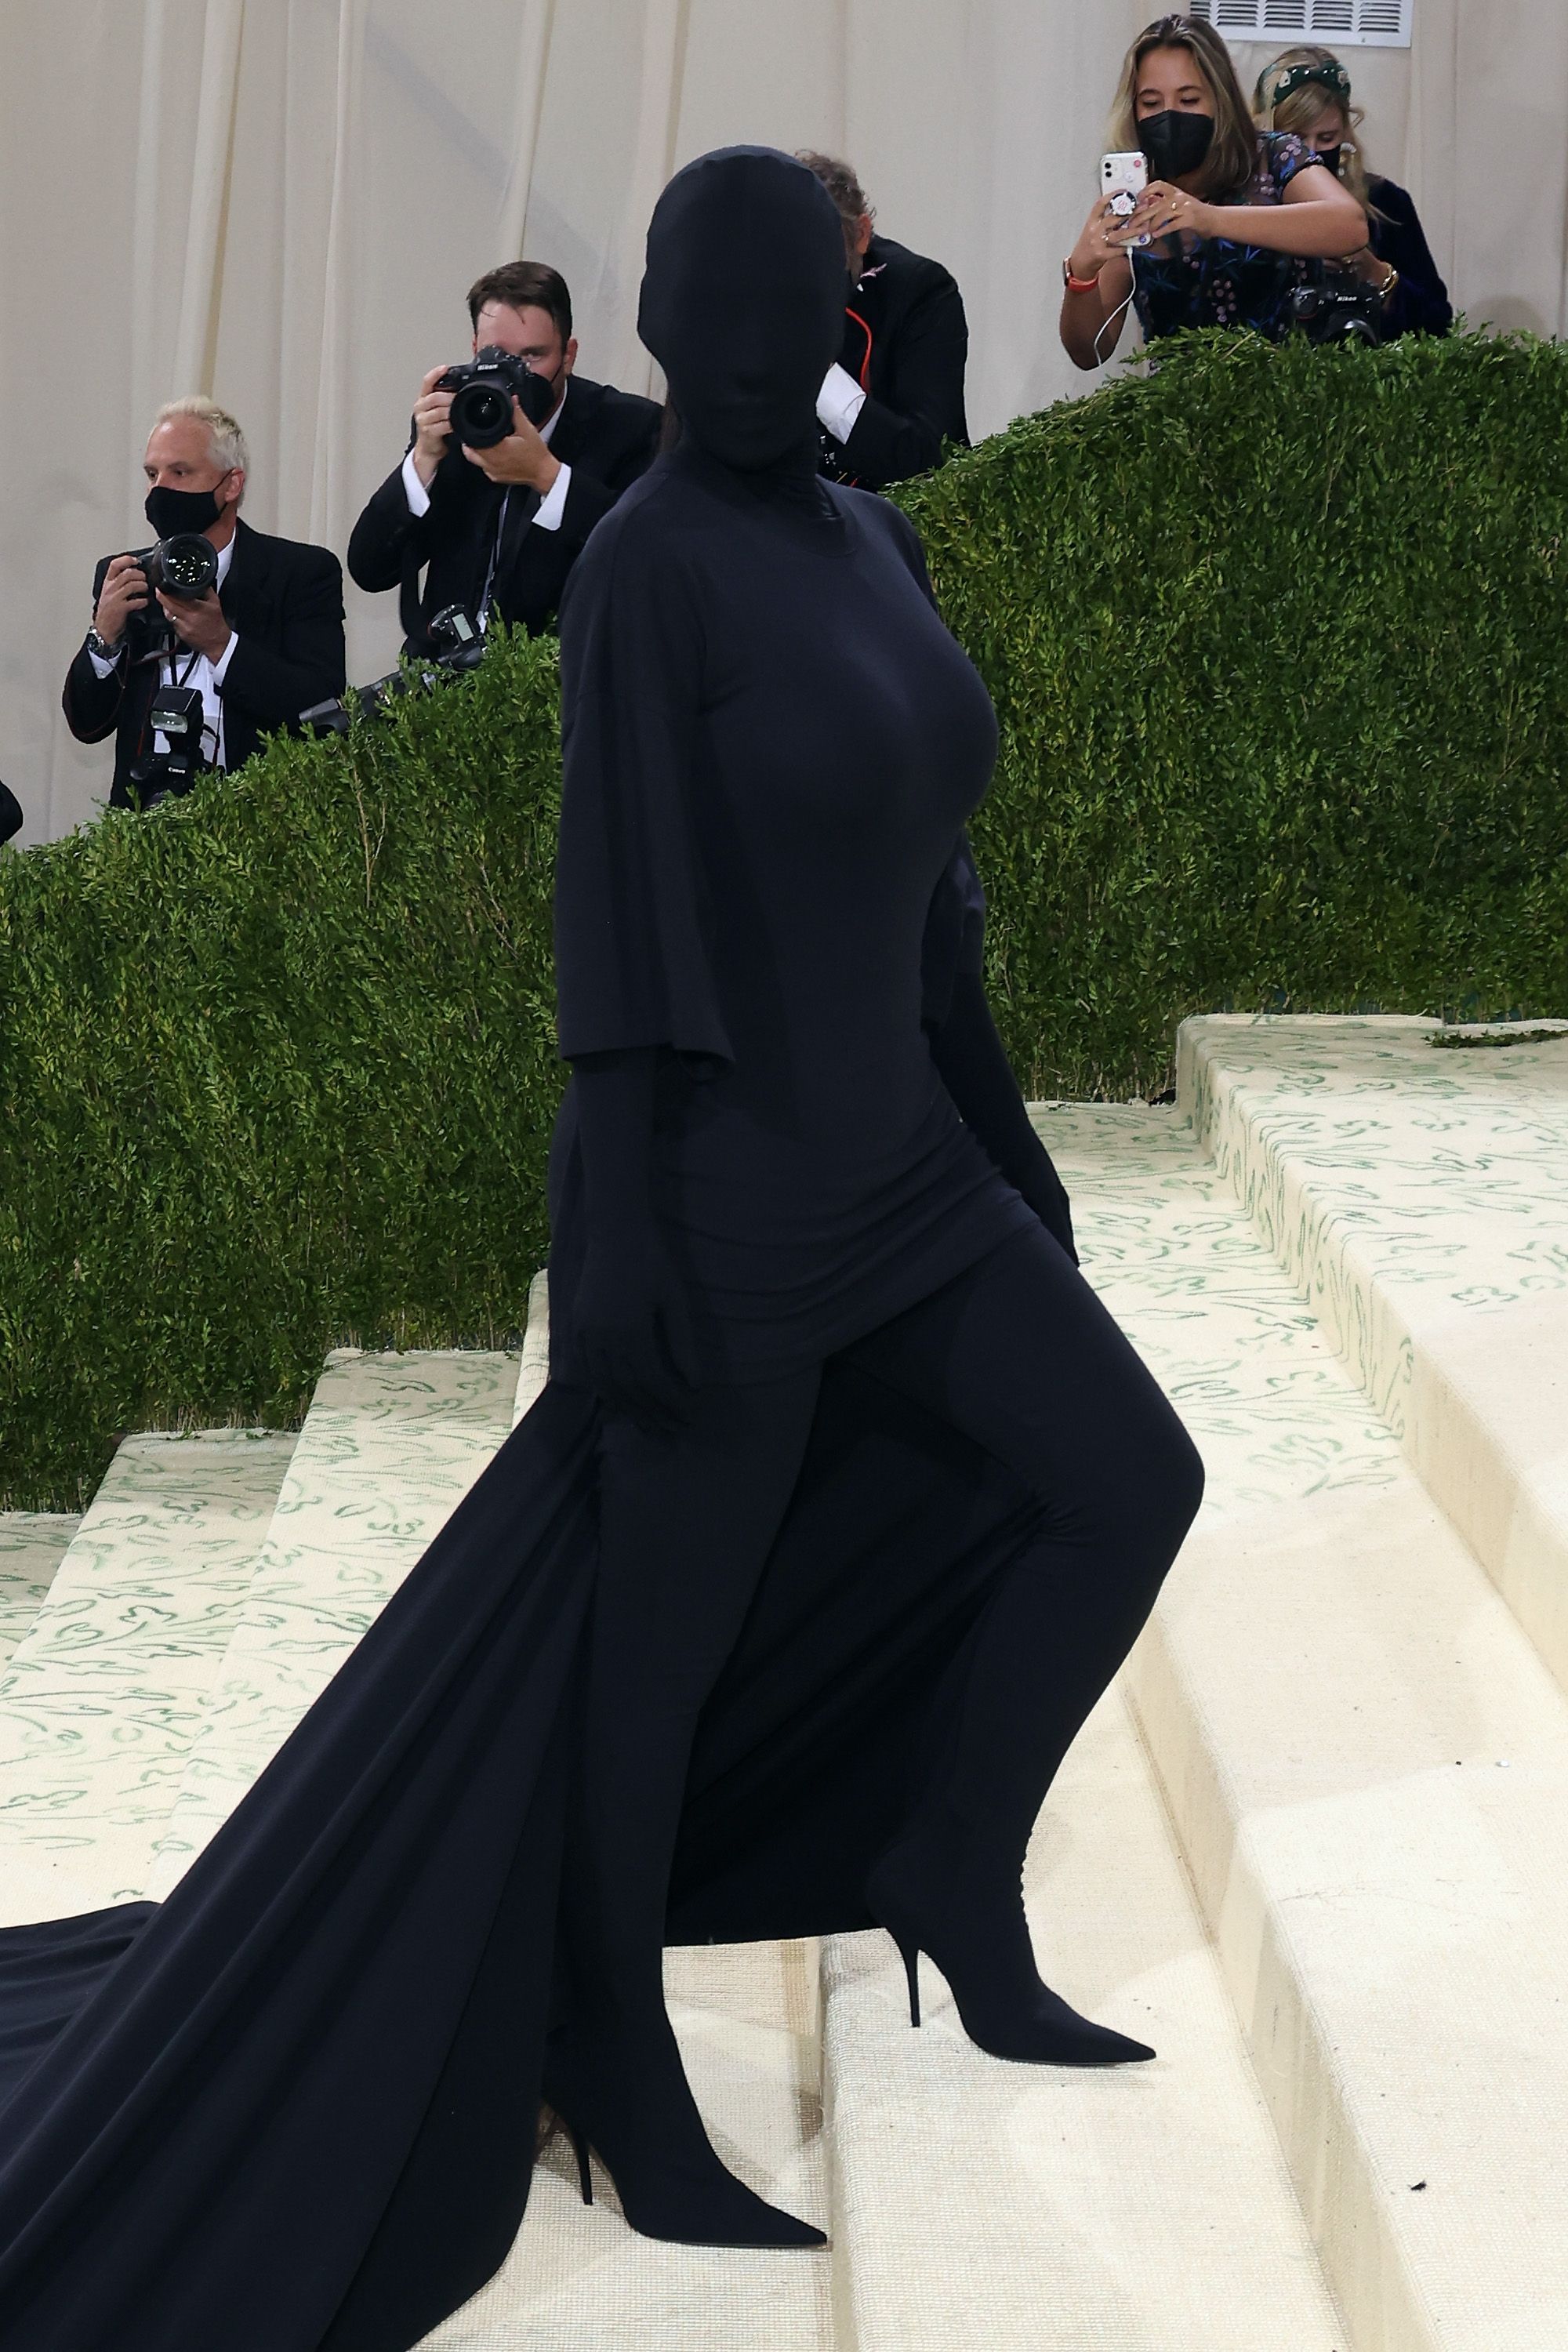 Kim Kardashian West during the 2021 Met Gala benefit "In America: A Lexicon of Fashion" at the Metropolitan Museum of Art on September 13, 2021 in New York City. | Source: Getty Images